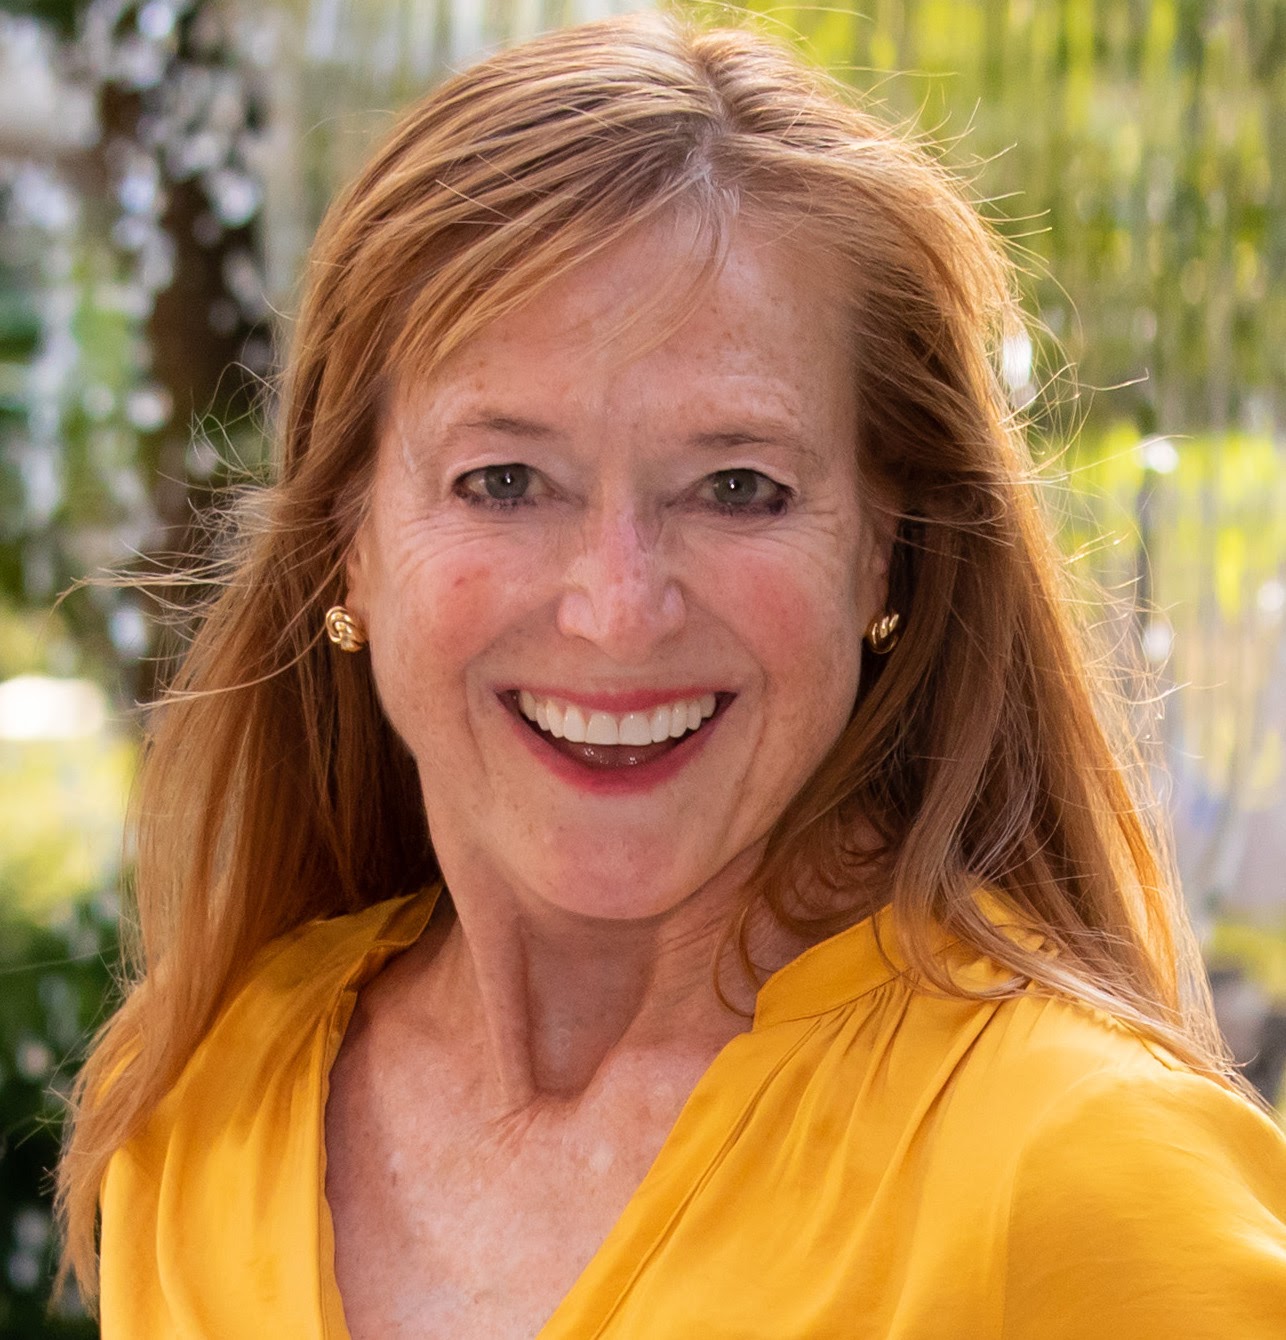 Red-headed white woman dressed in a yellow top faces the camera with a big smile